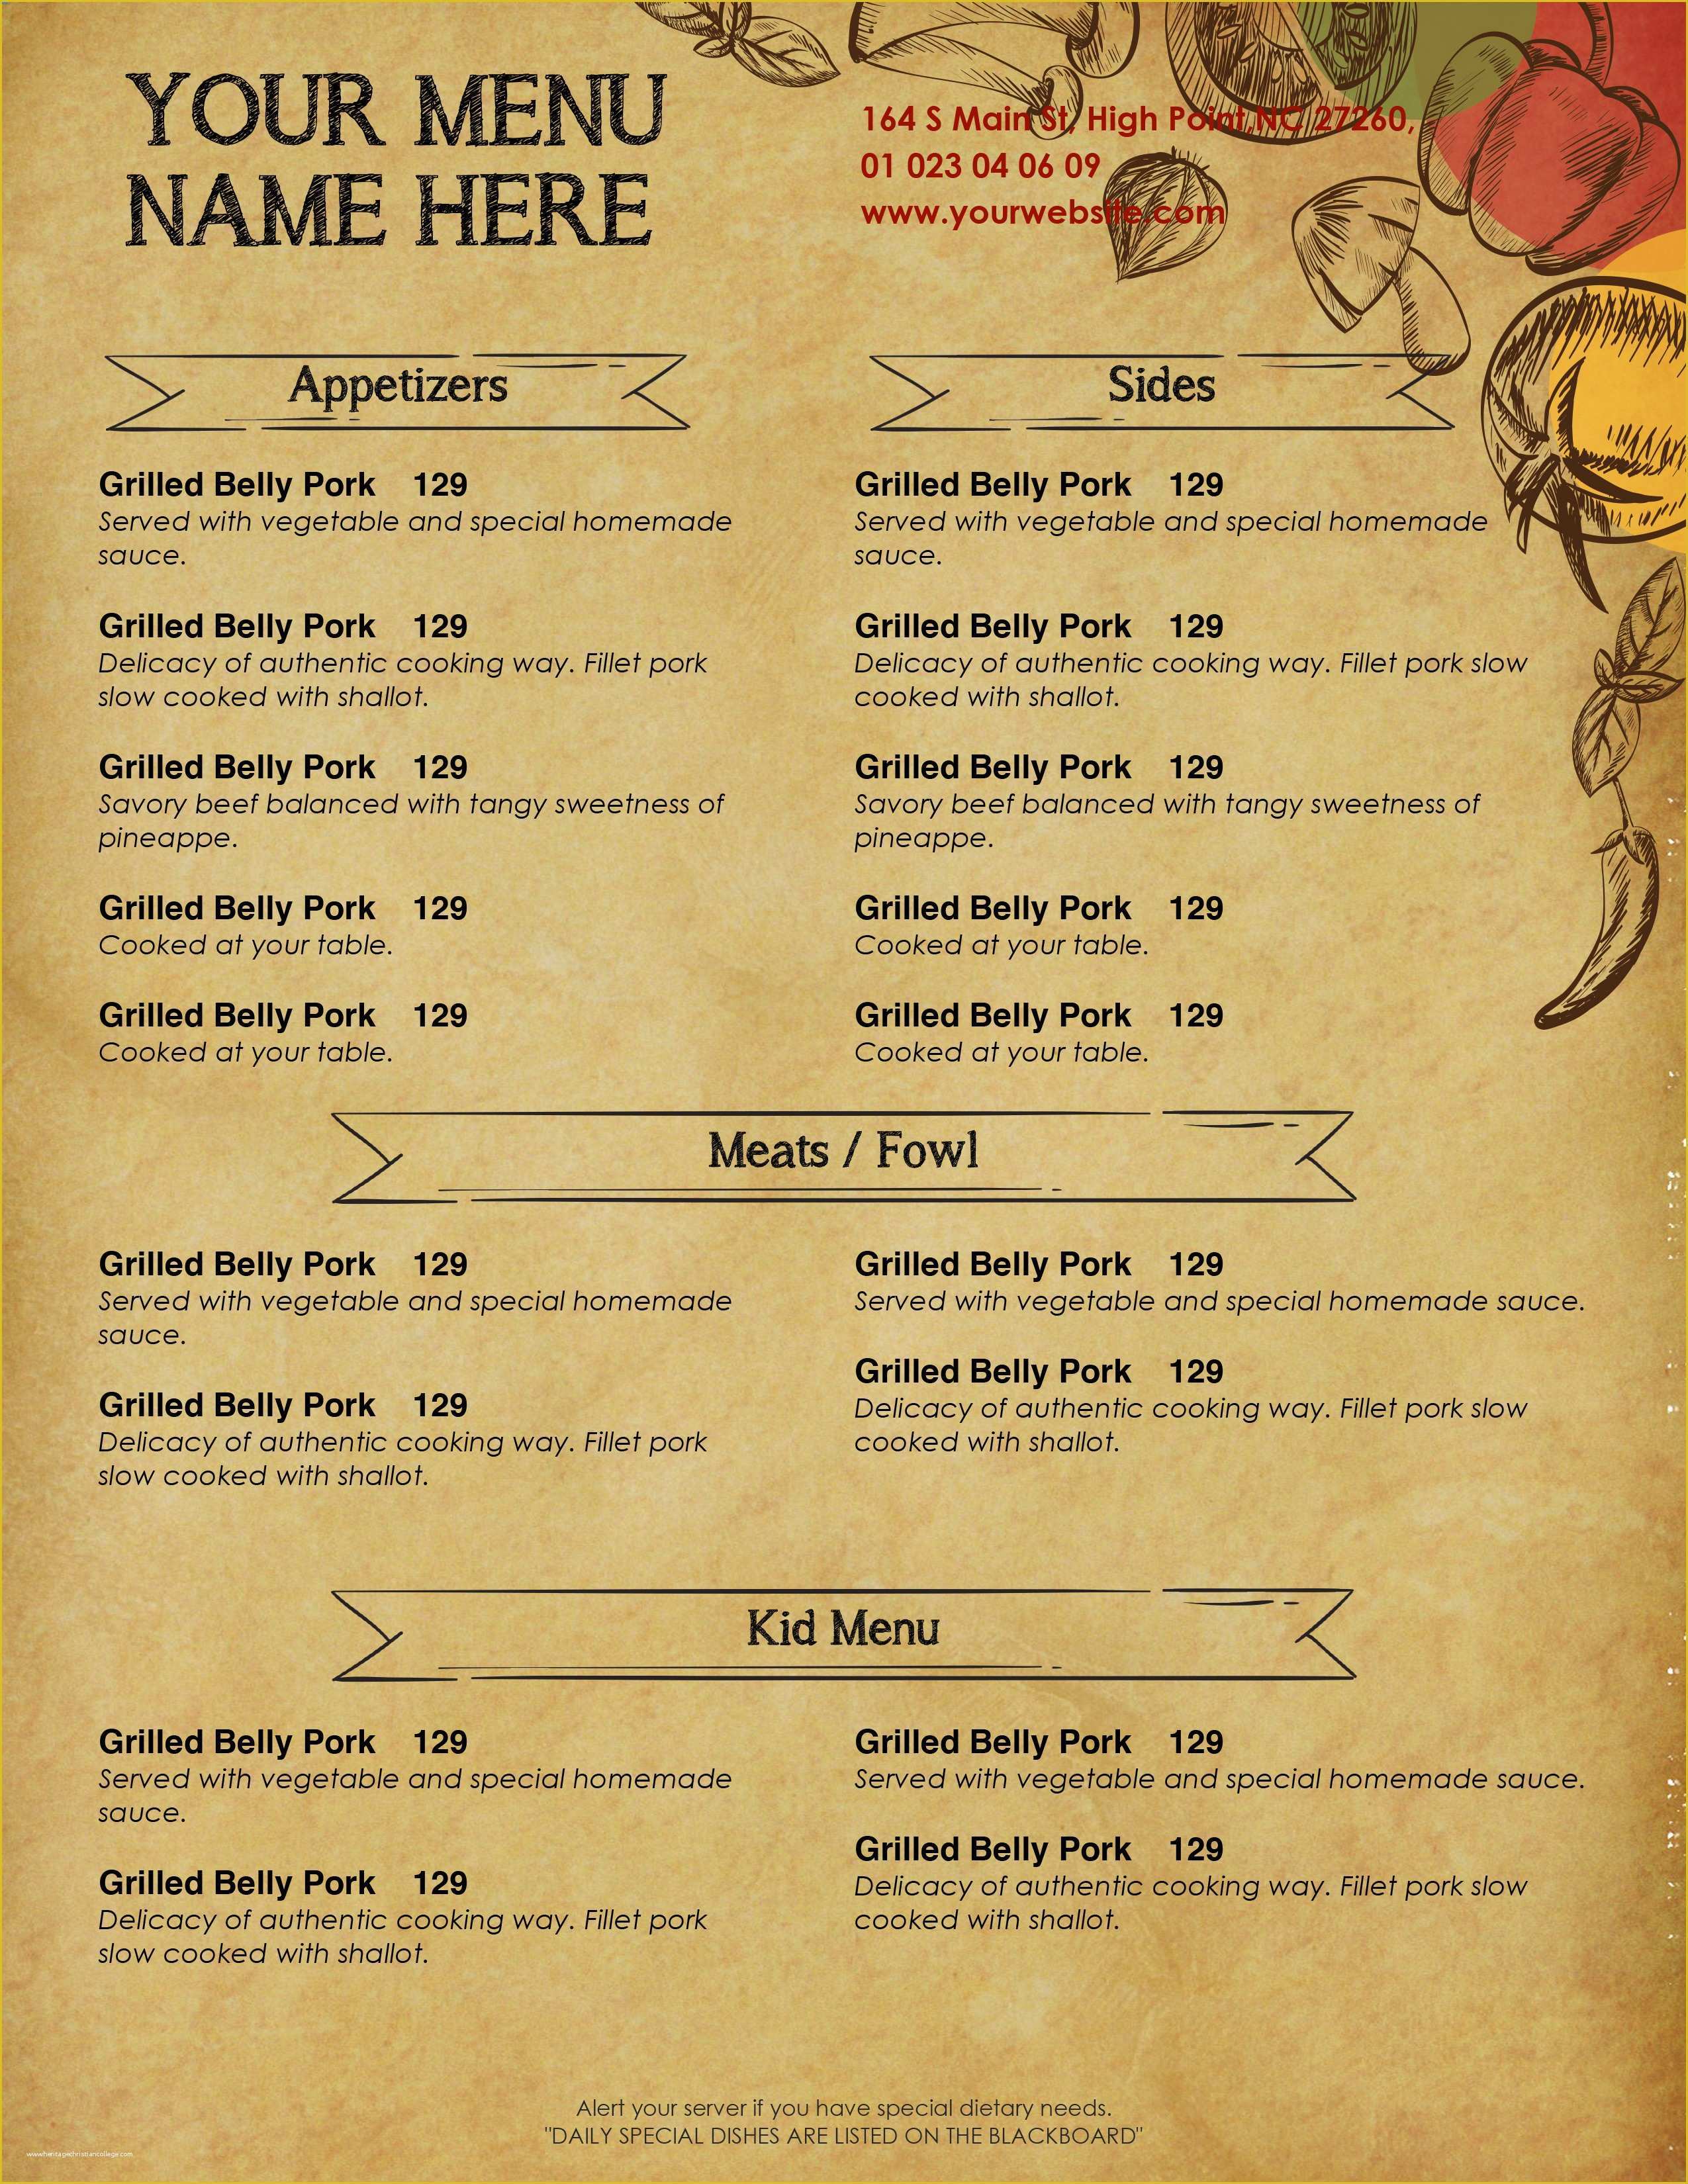 Free Restaurant Menu Templates for Word Of Design & Templates Menu Templates Wedding Menu Food